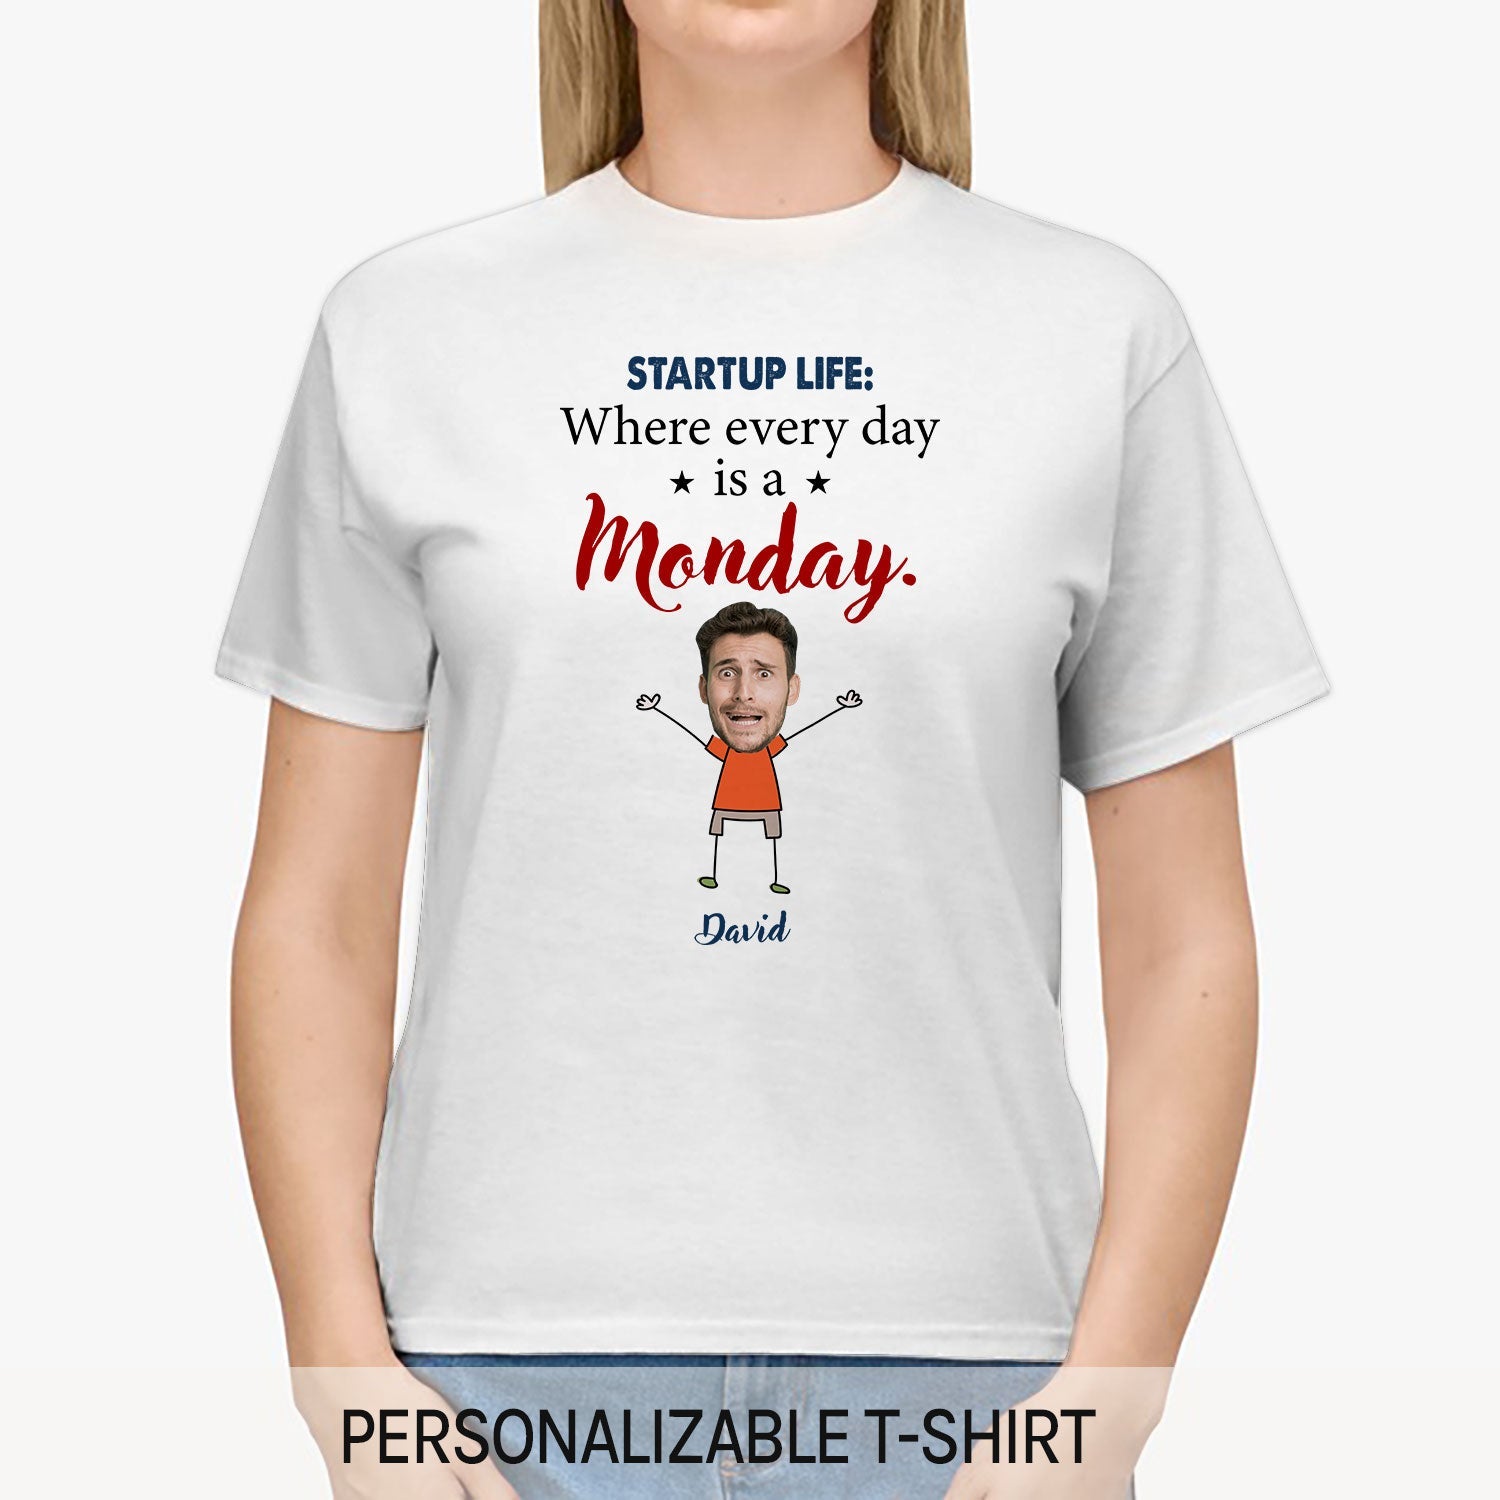 Startup life: Where every day is a Monday. - Personalized Birthday gift for Startup Founder - Custom Tshirt - MyMindfulGifts